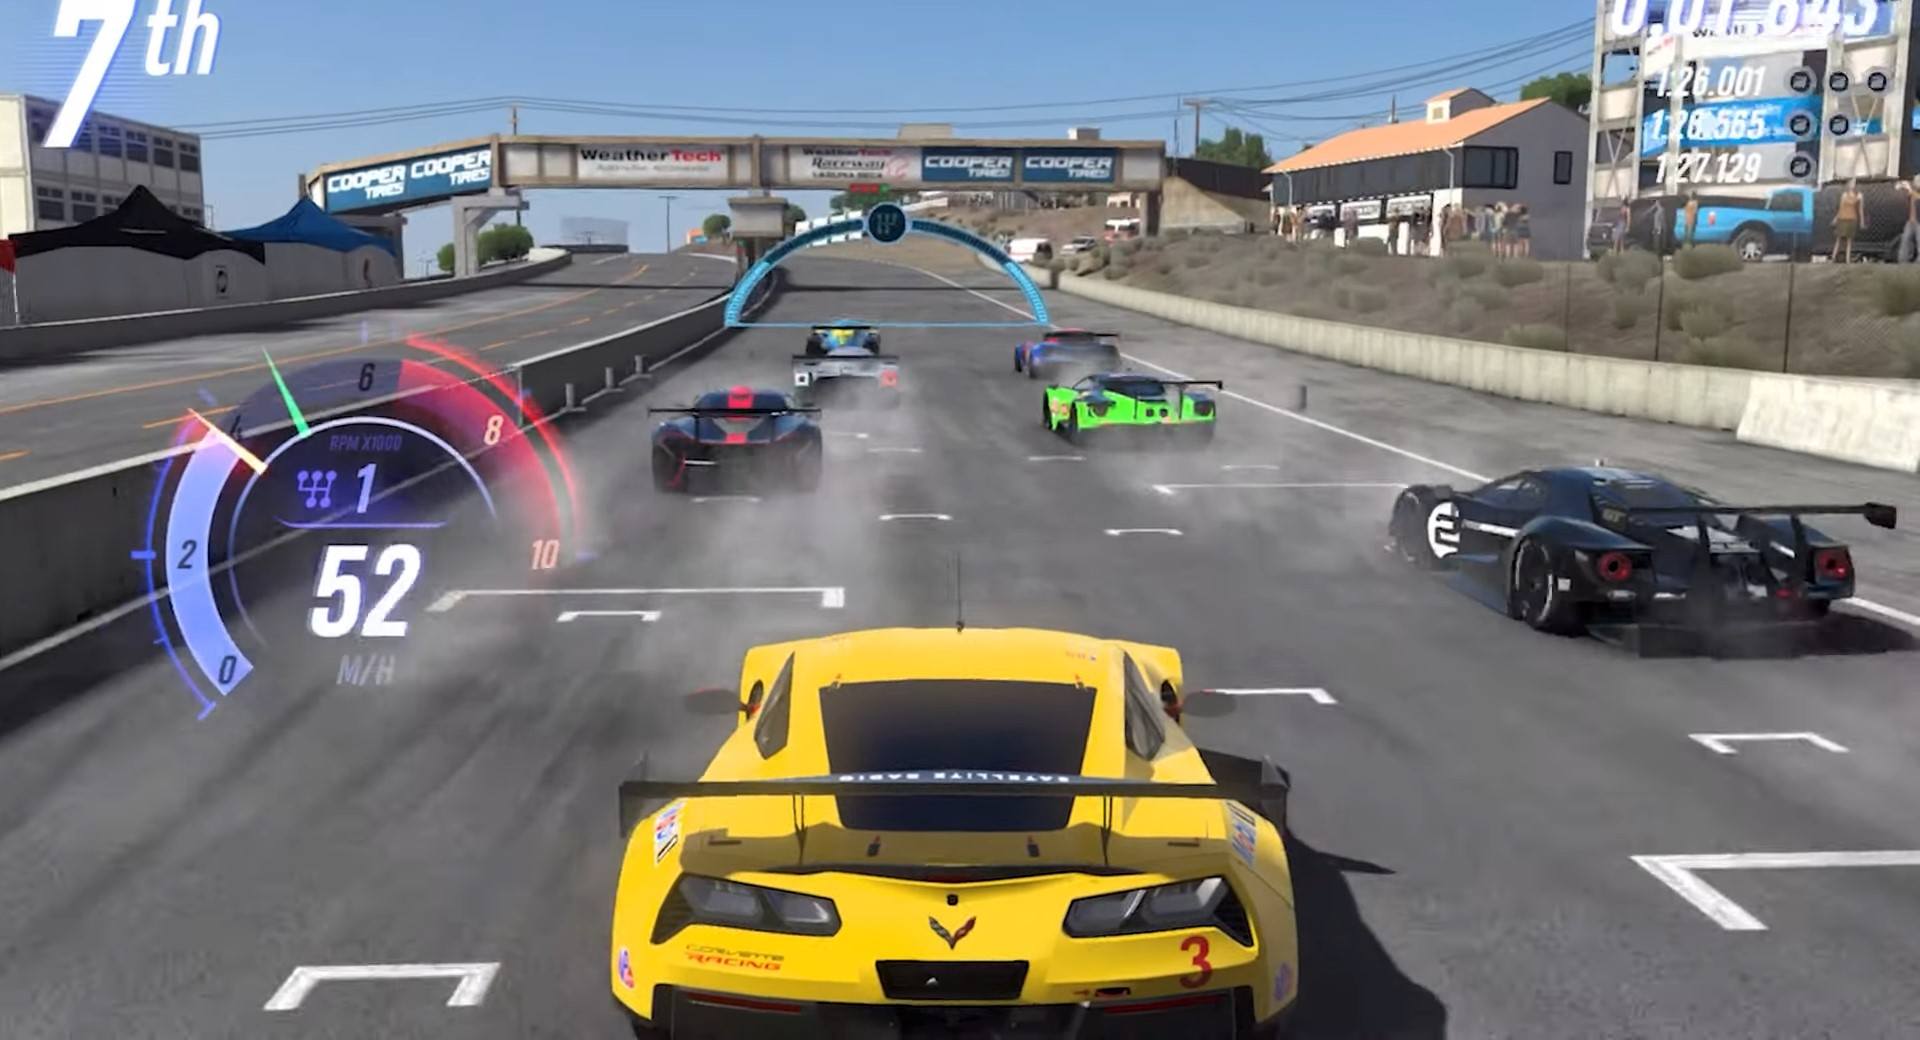 One-Touch Racer Title “Project Cars GO” Now Available on Android